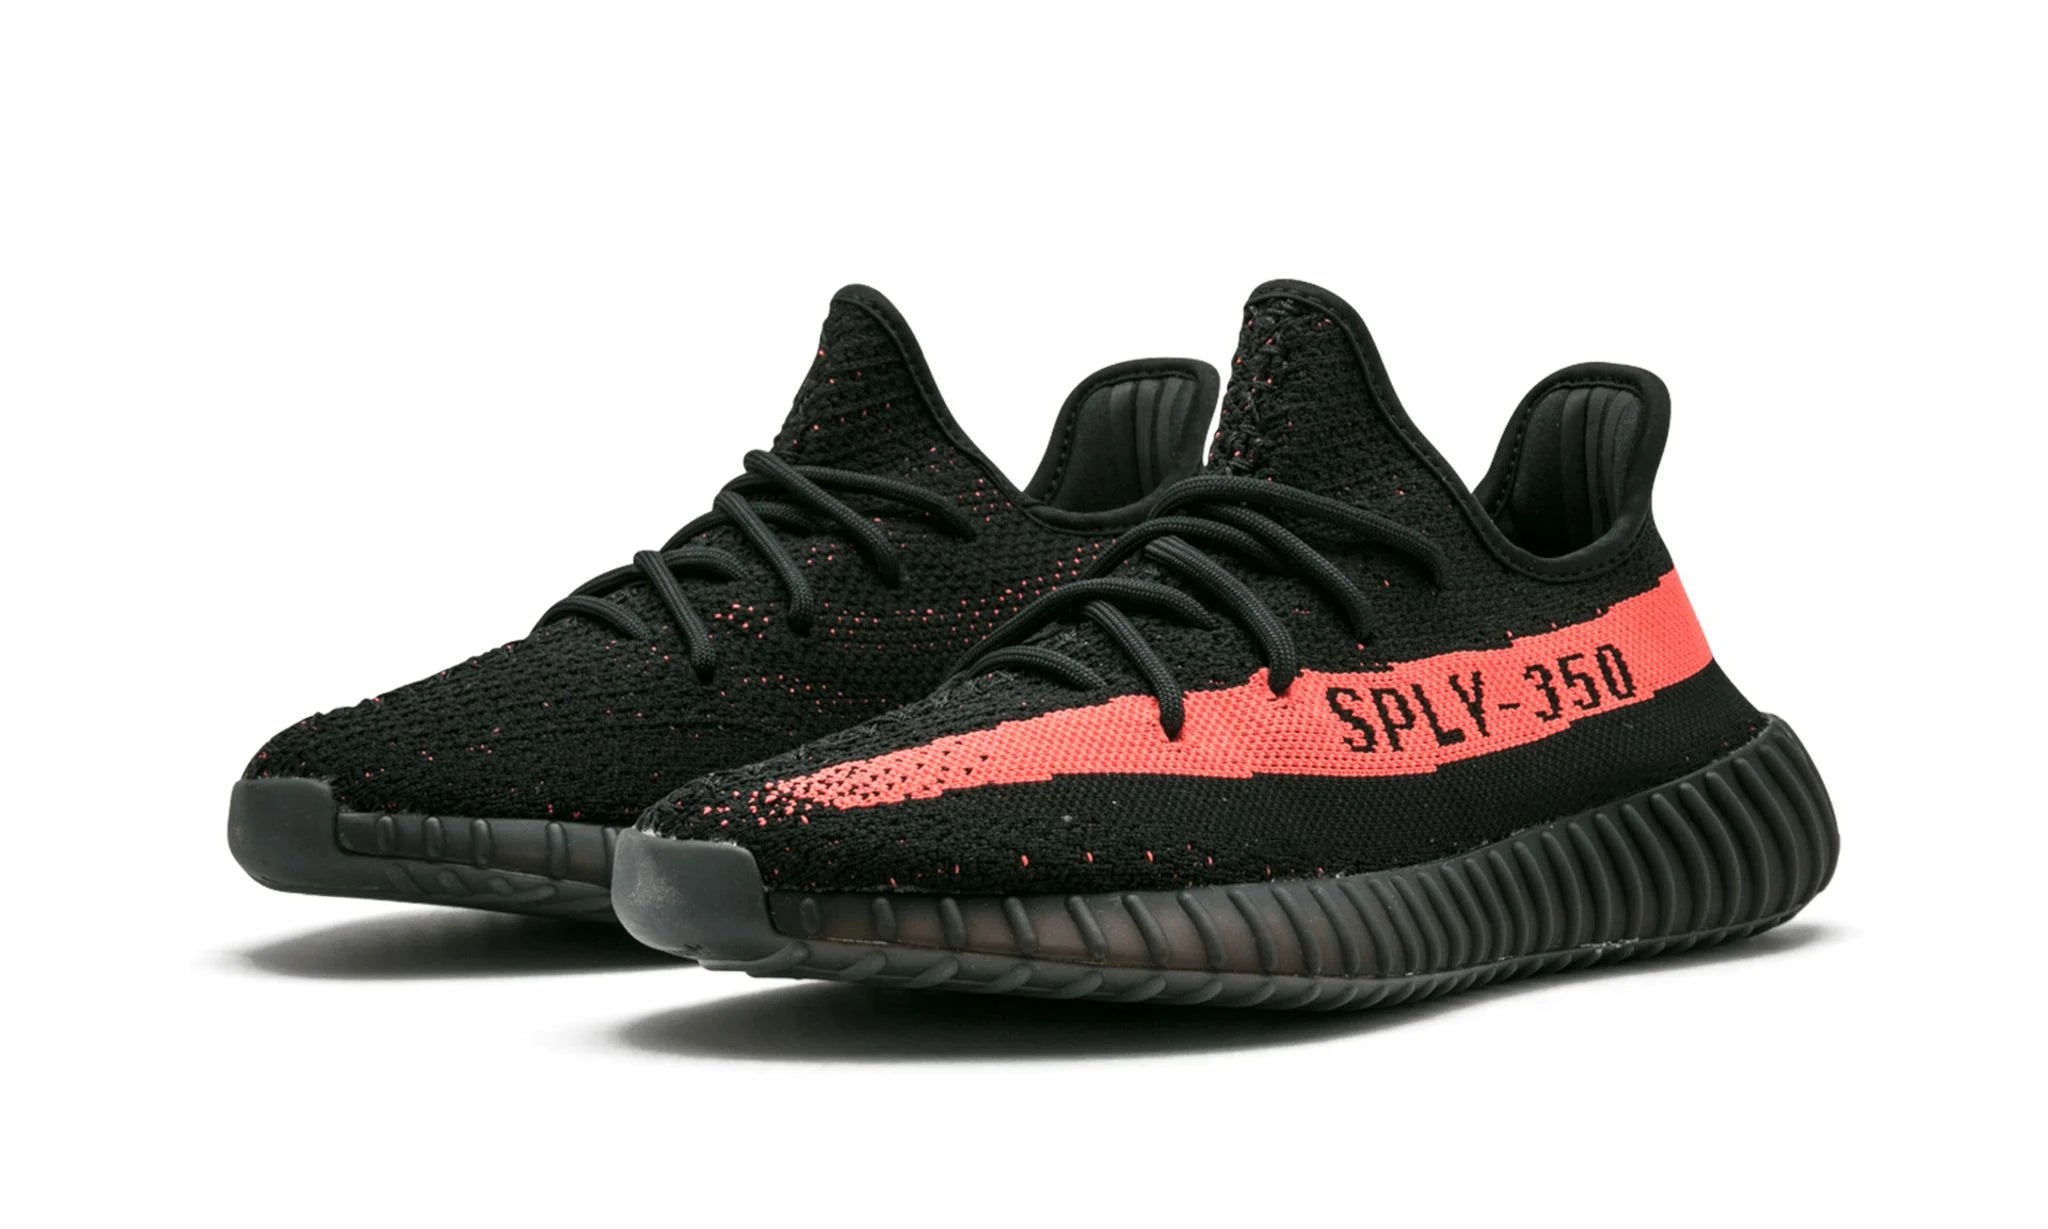 Yeezy Boost 350 V2 "Cored Red Black"